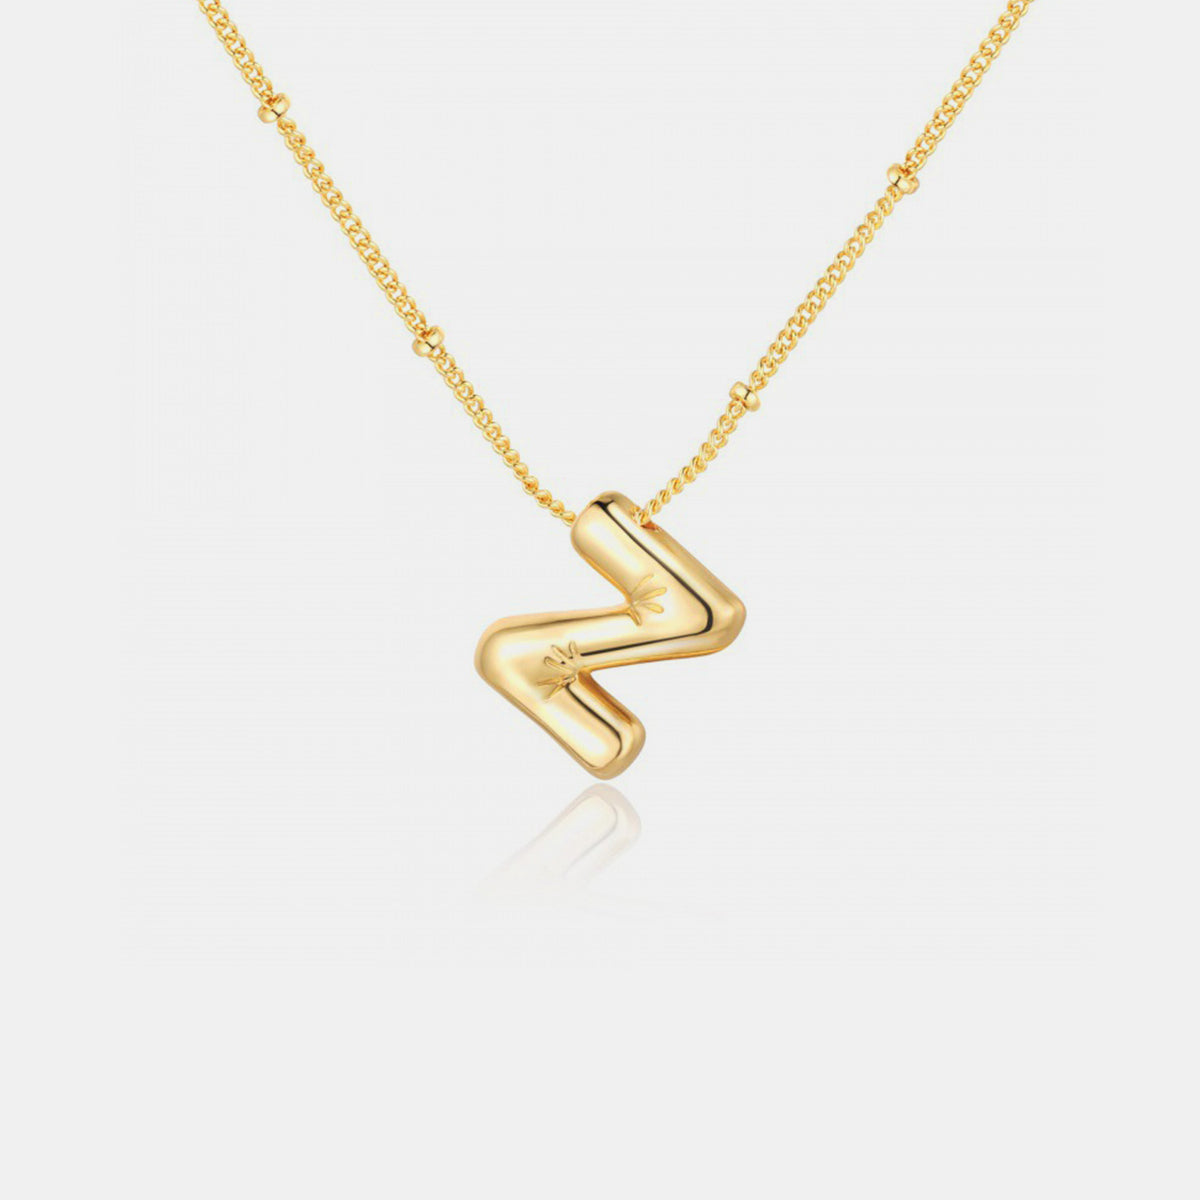 Gold-Plated Letter Pendant Necklace